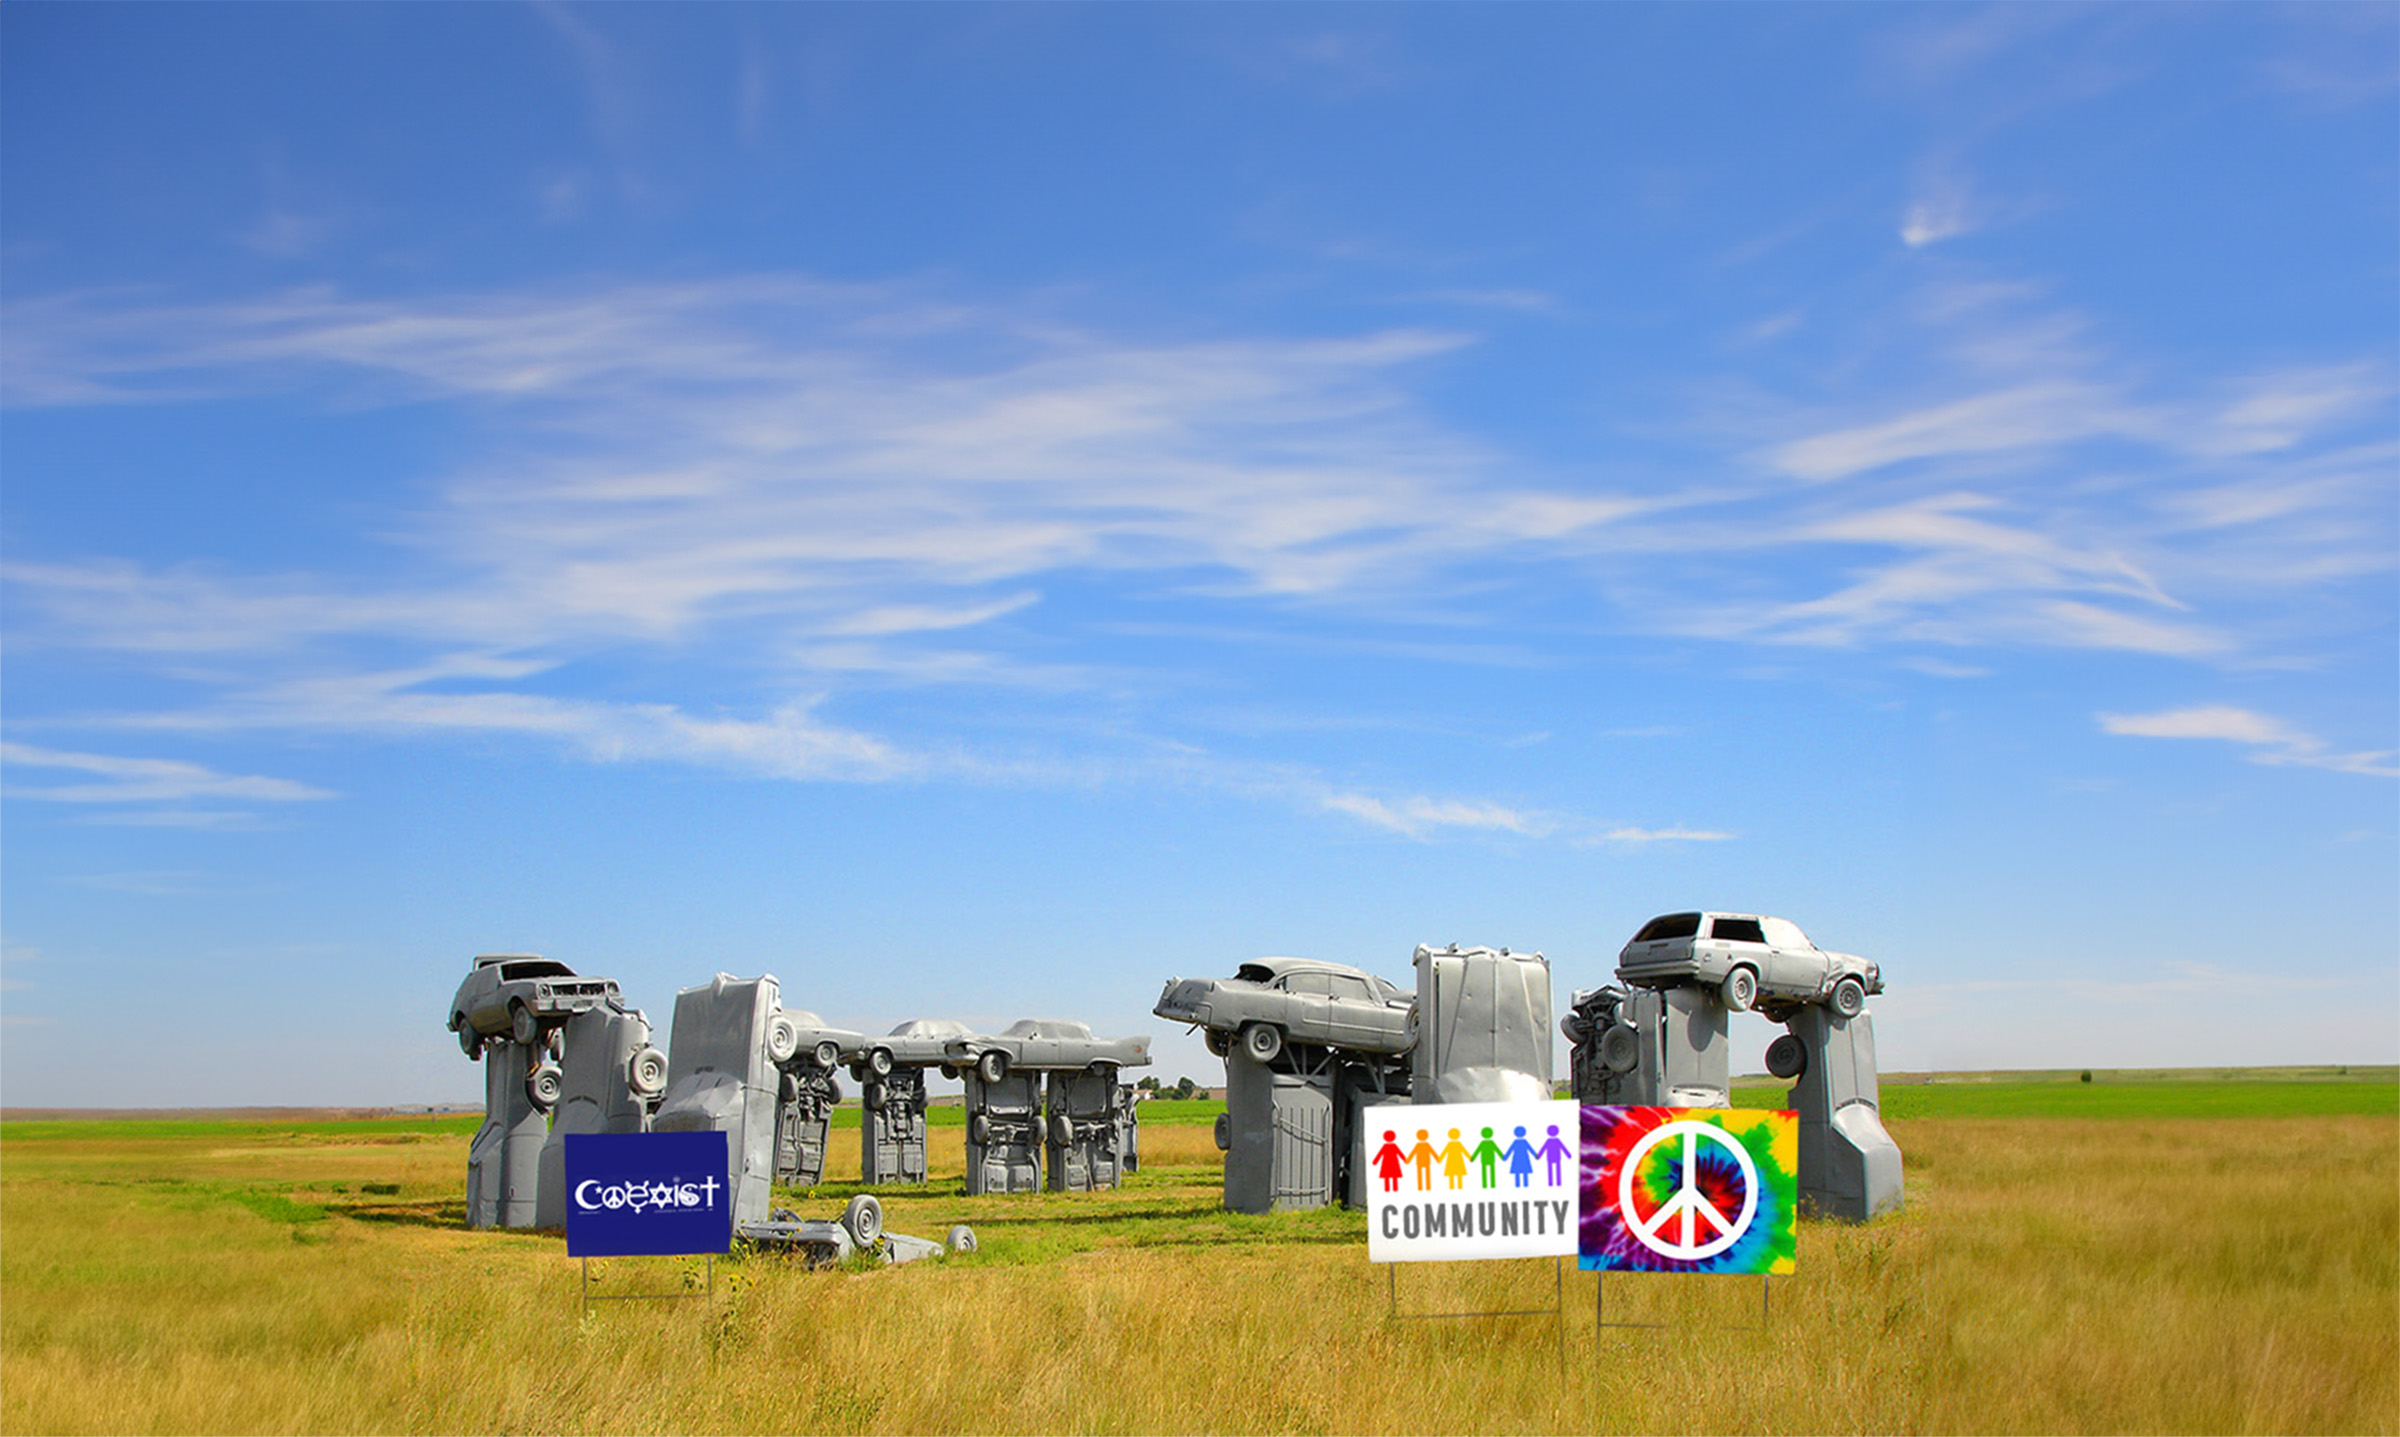 Carhenge monument in Nebraska with yard signs celebrating "Coexist," "Community" and "Peace"